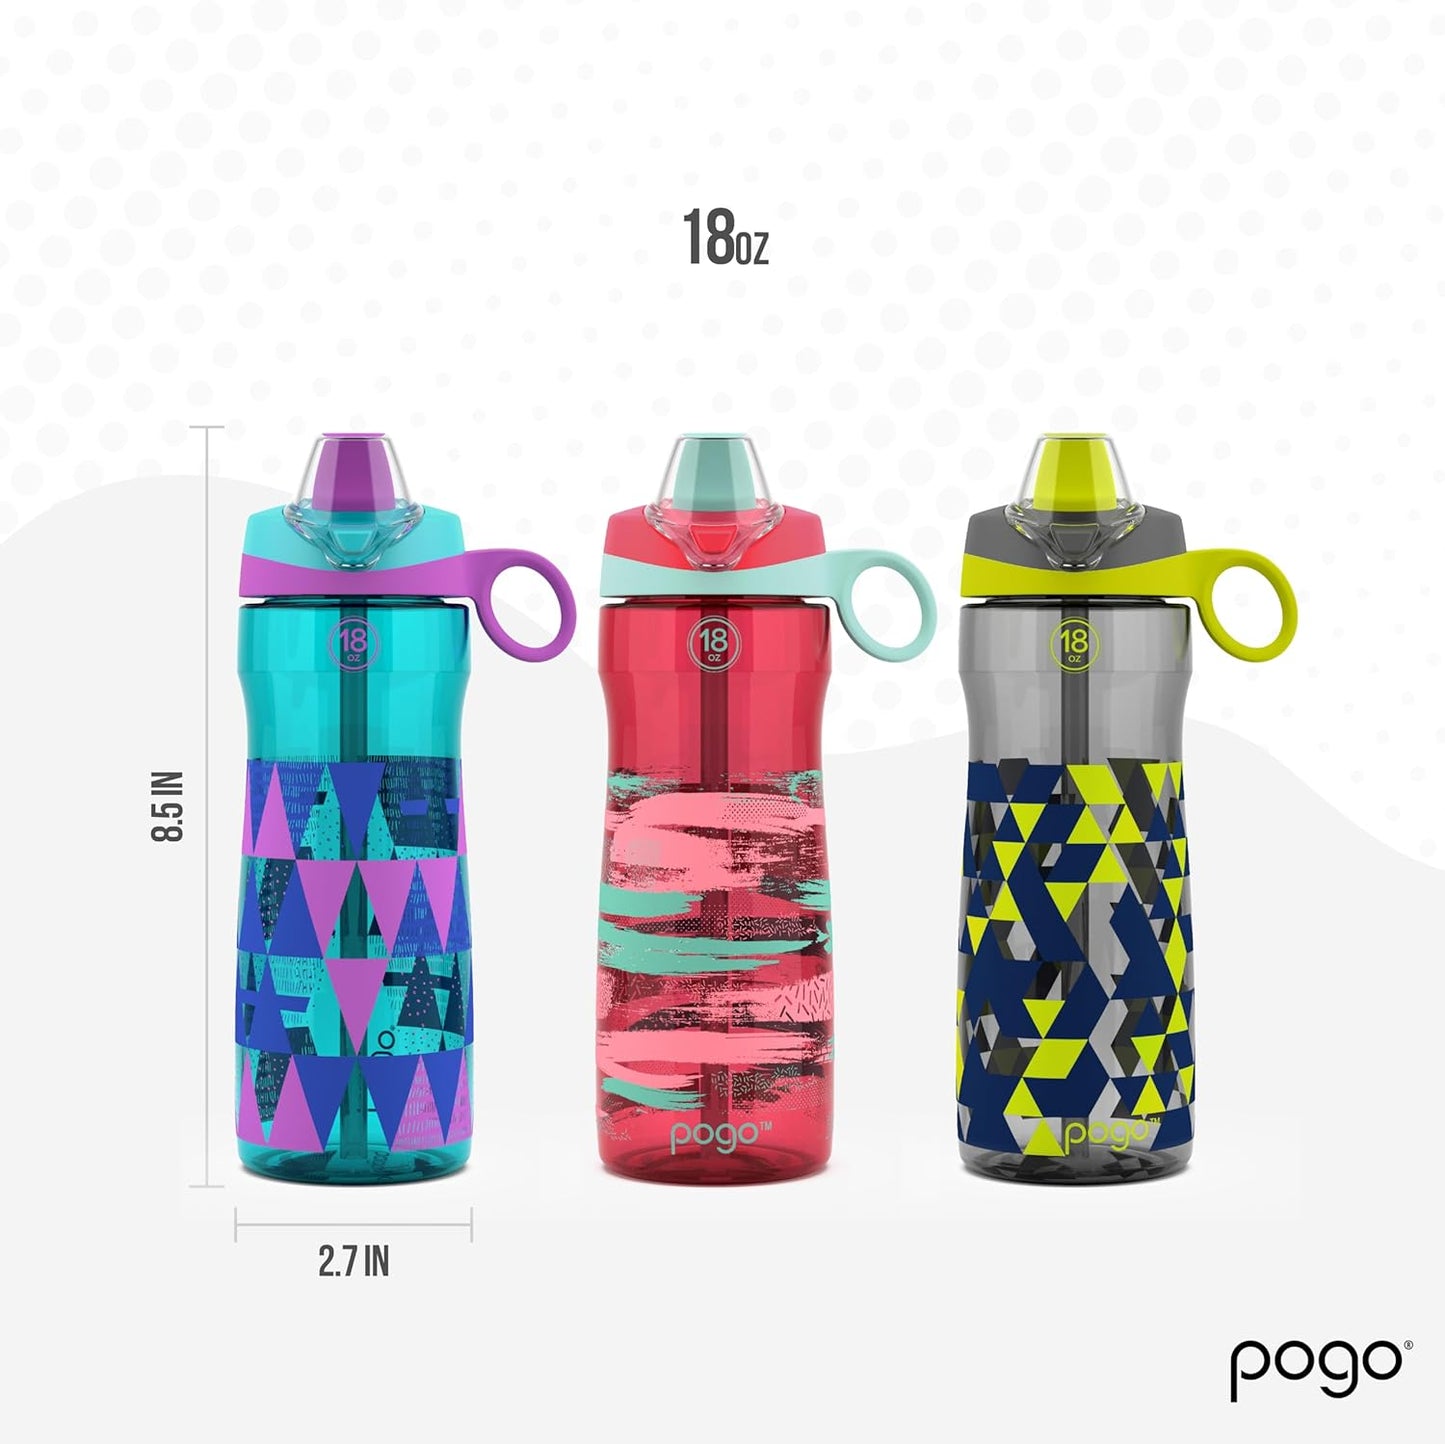 32Oz Plastic Water Bottle with Chug Lid and Carry Handle, Reusable